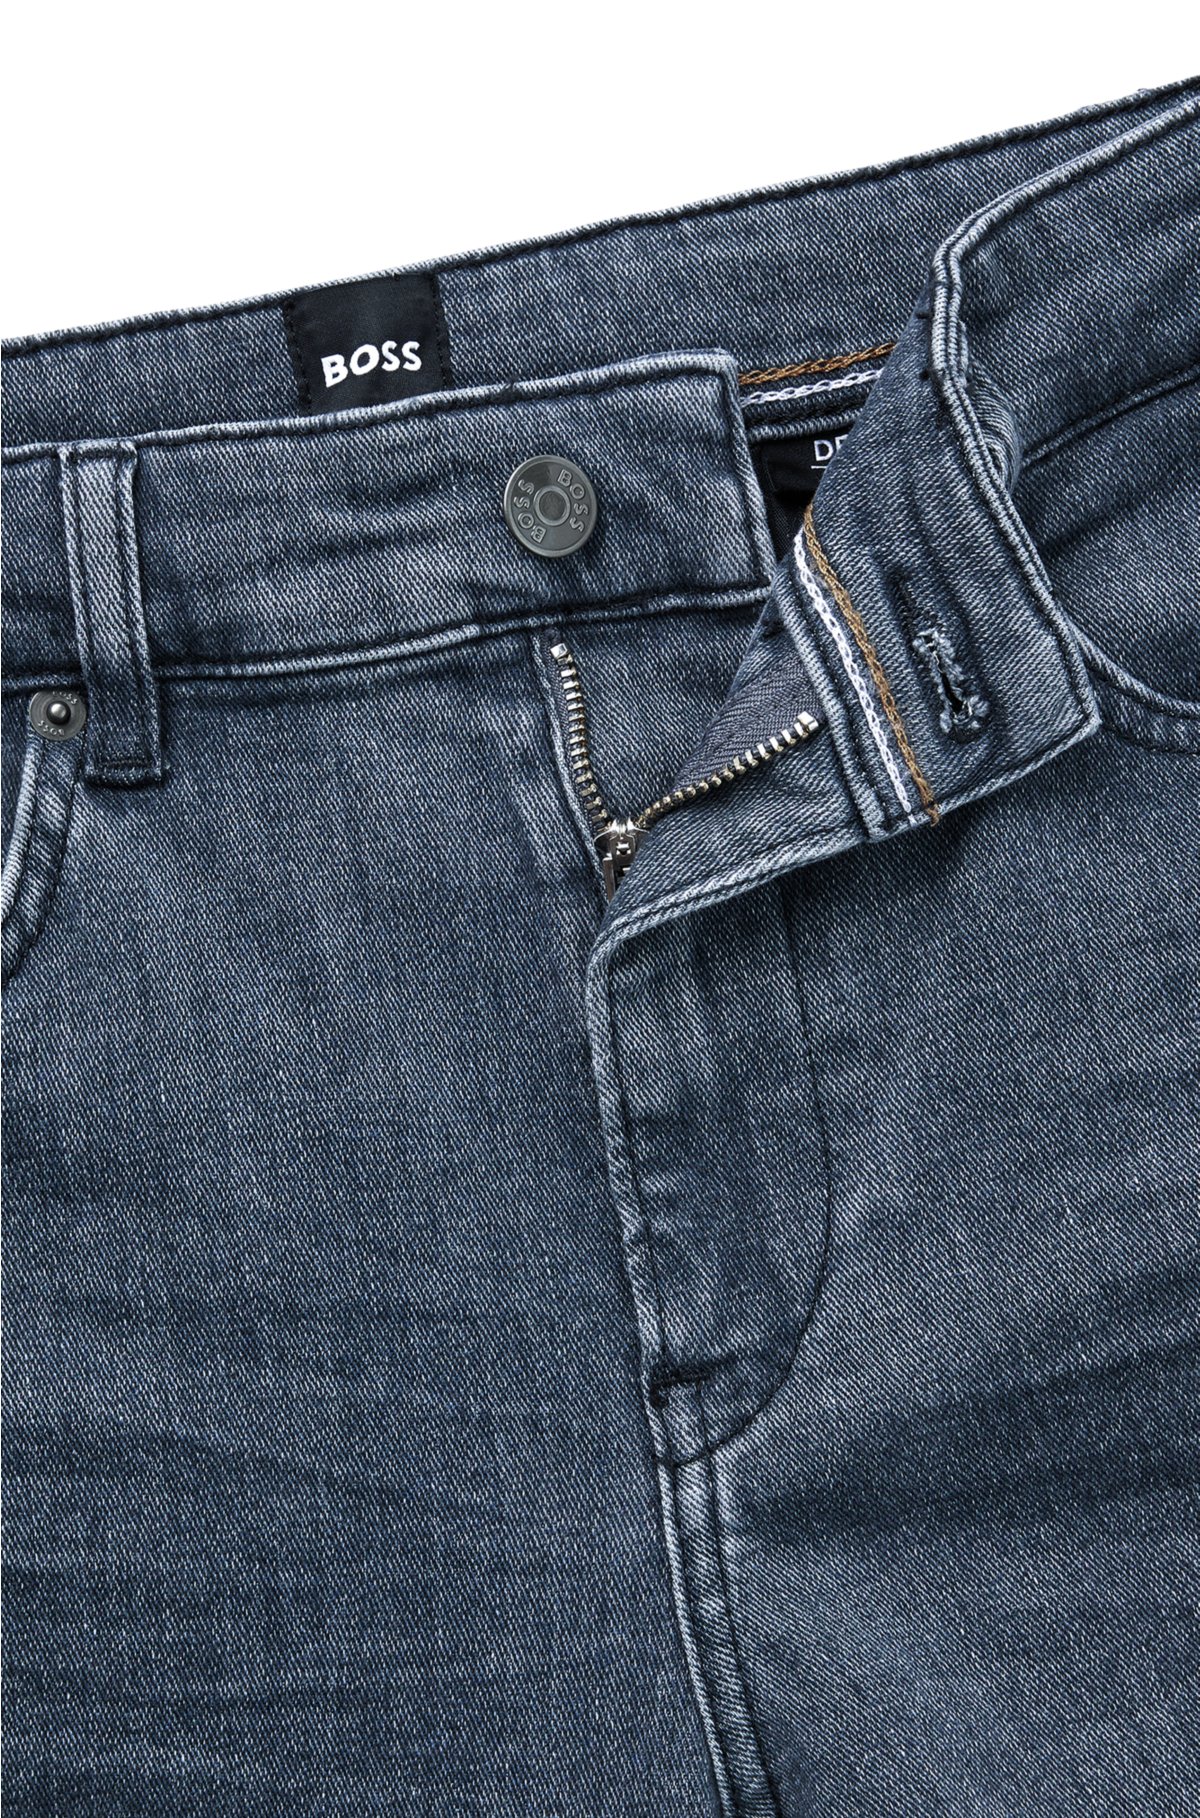 BOSS - Slim-fit jeans denim Italian in gray cashmere-touch